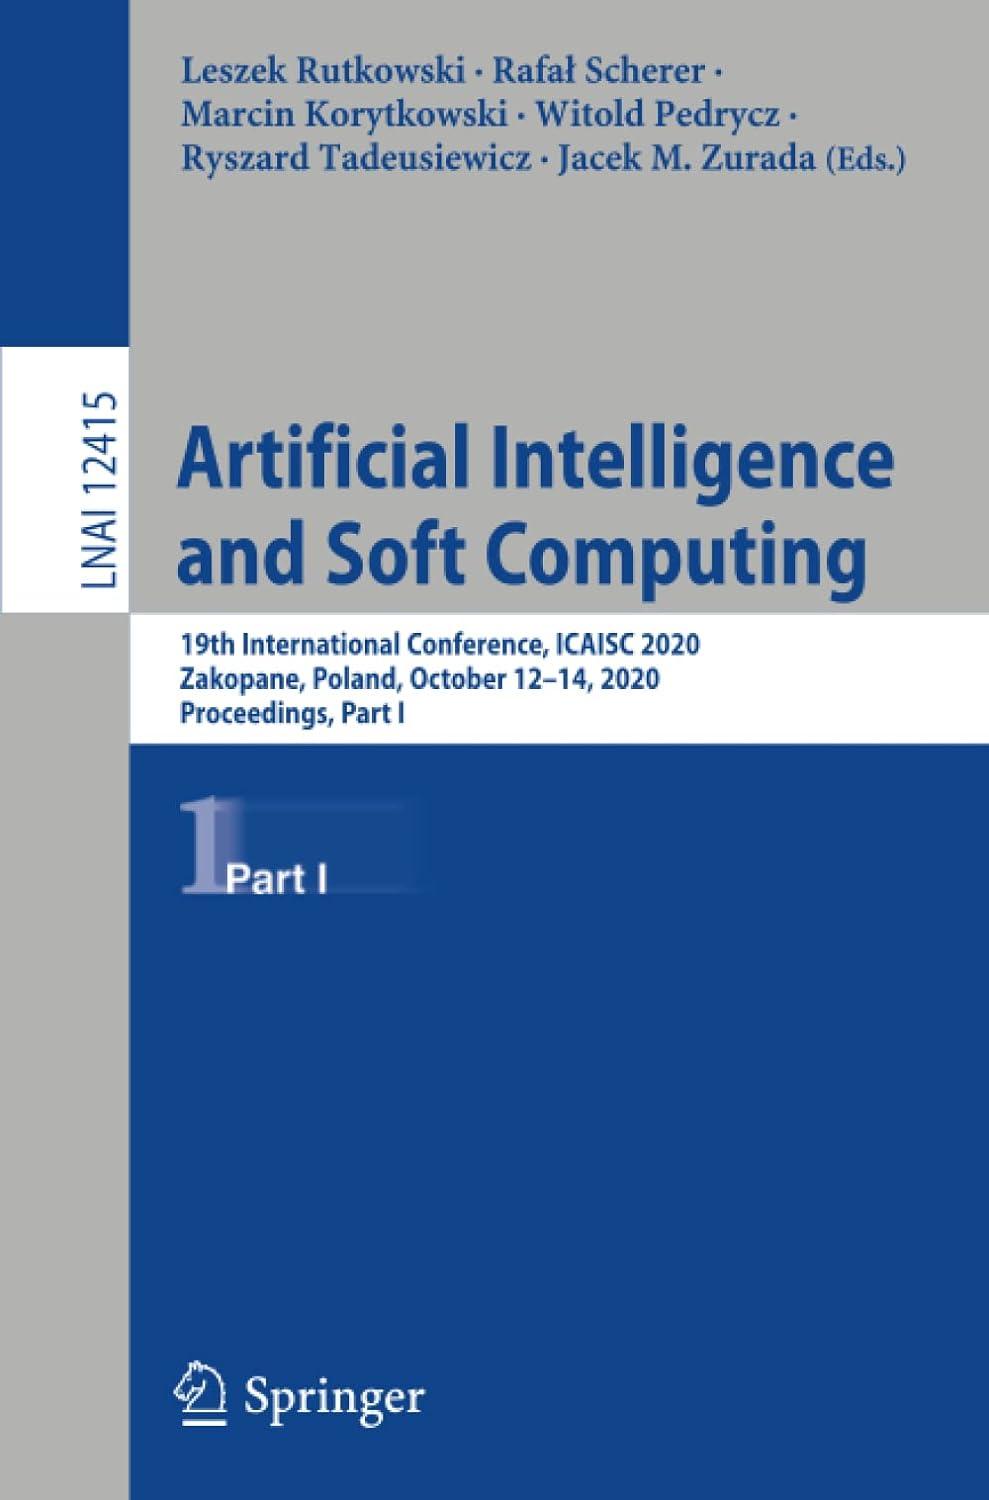 artificial intelligence and soft computing 19th international conference  icaisc 2020  zakopane  poland part